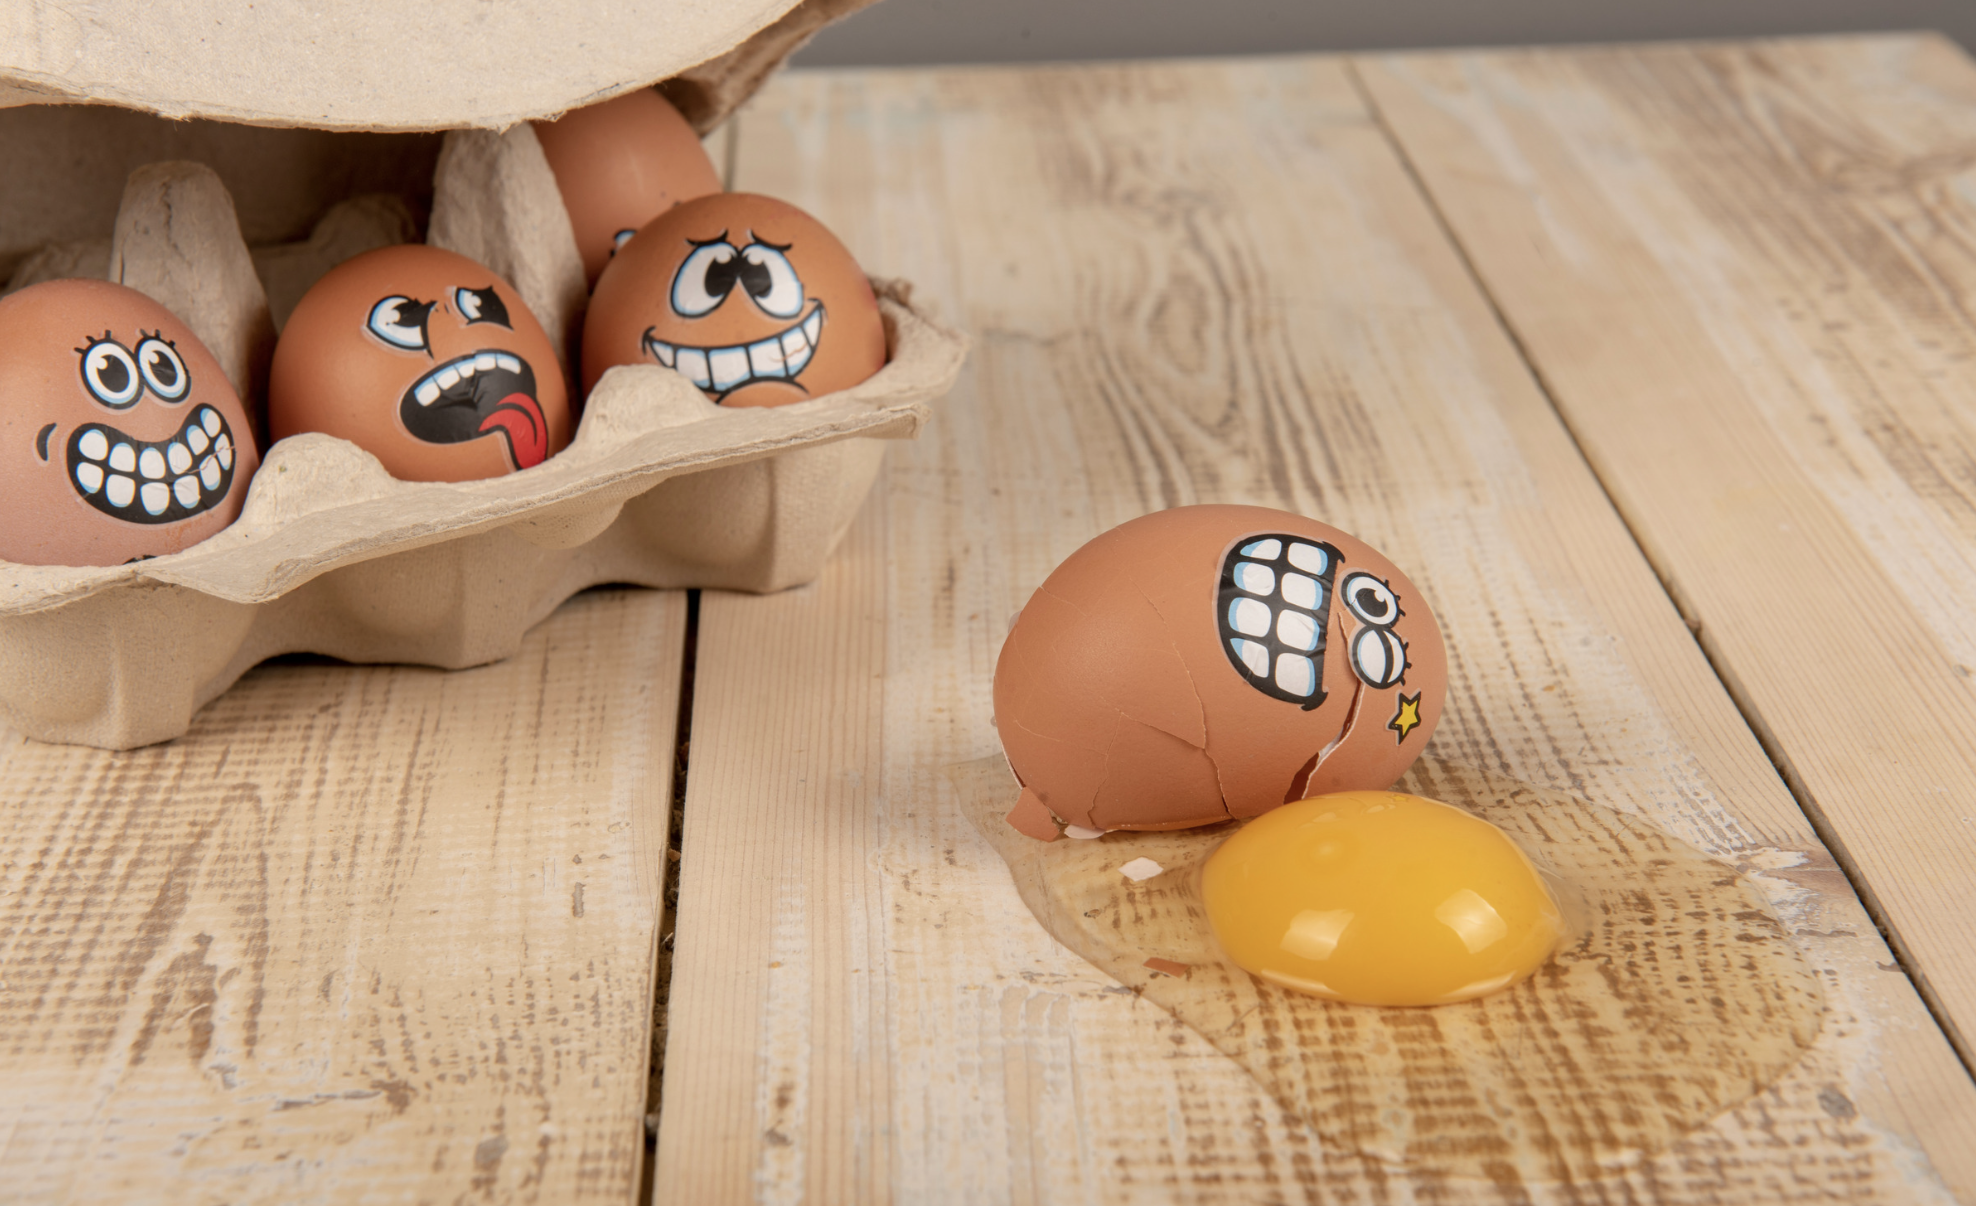 A cartong of eggs with comical faces with different expressions painted on them. One of the eggs is laying outside the carton, cracked with yolk running out, and with a nervous expression